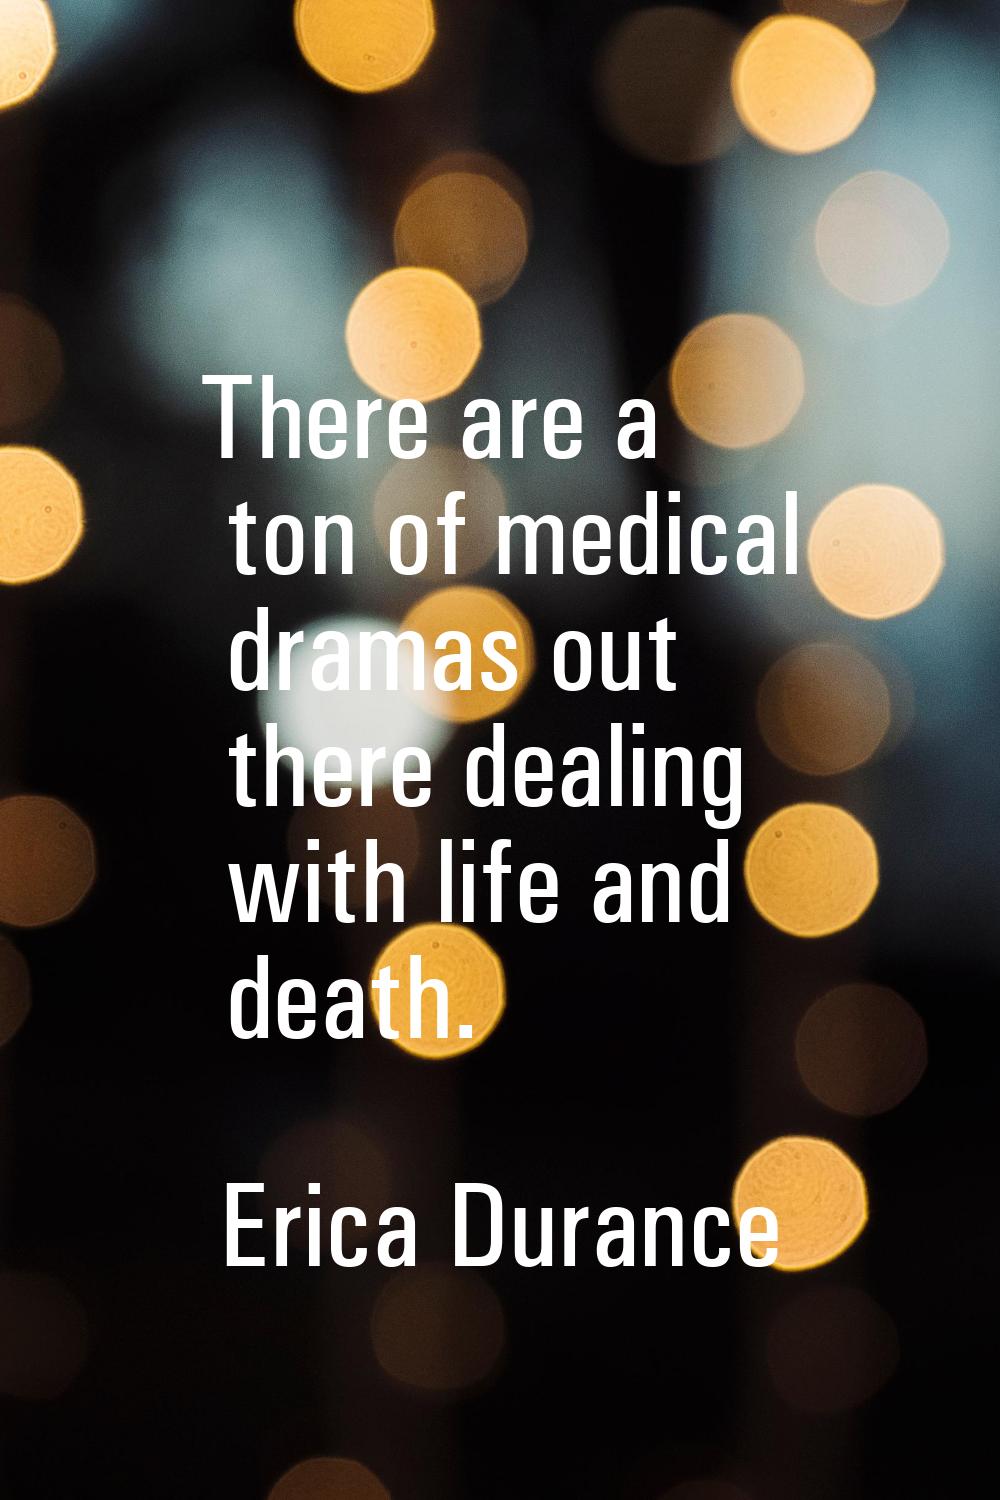 There are a ton of medical dramas out there dealing with life and death.